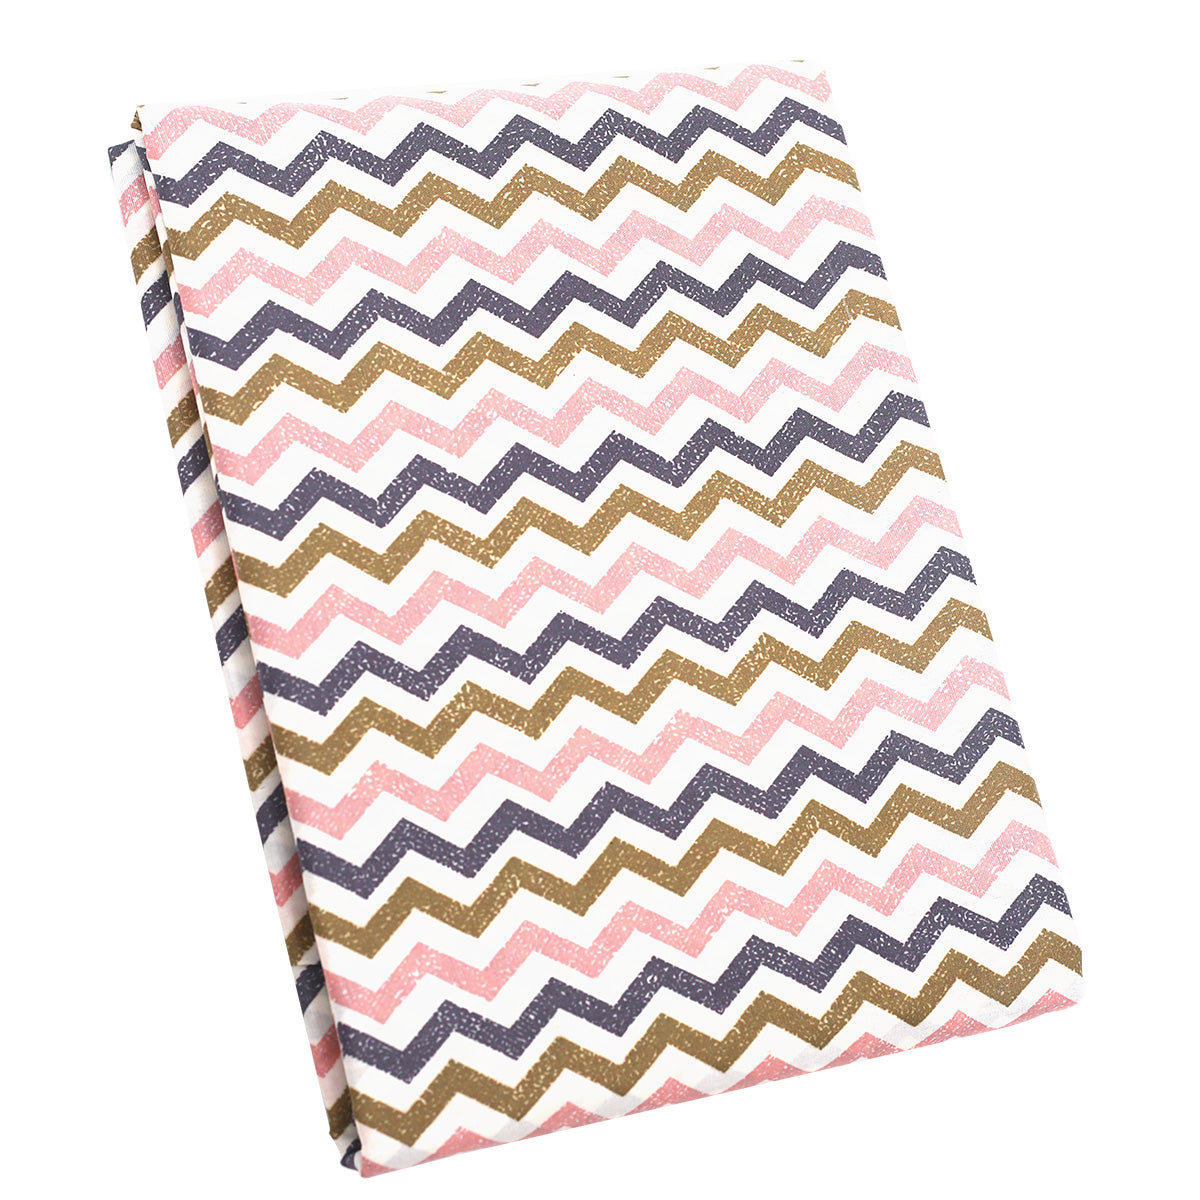 Funly Zig Zag Double Bed Sheet